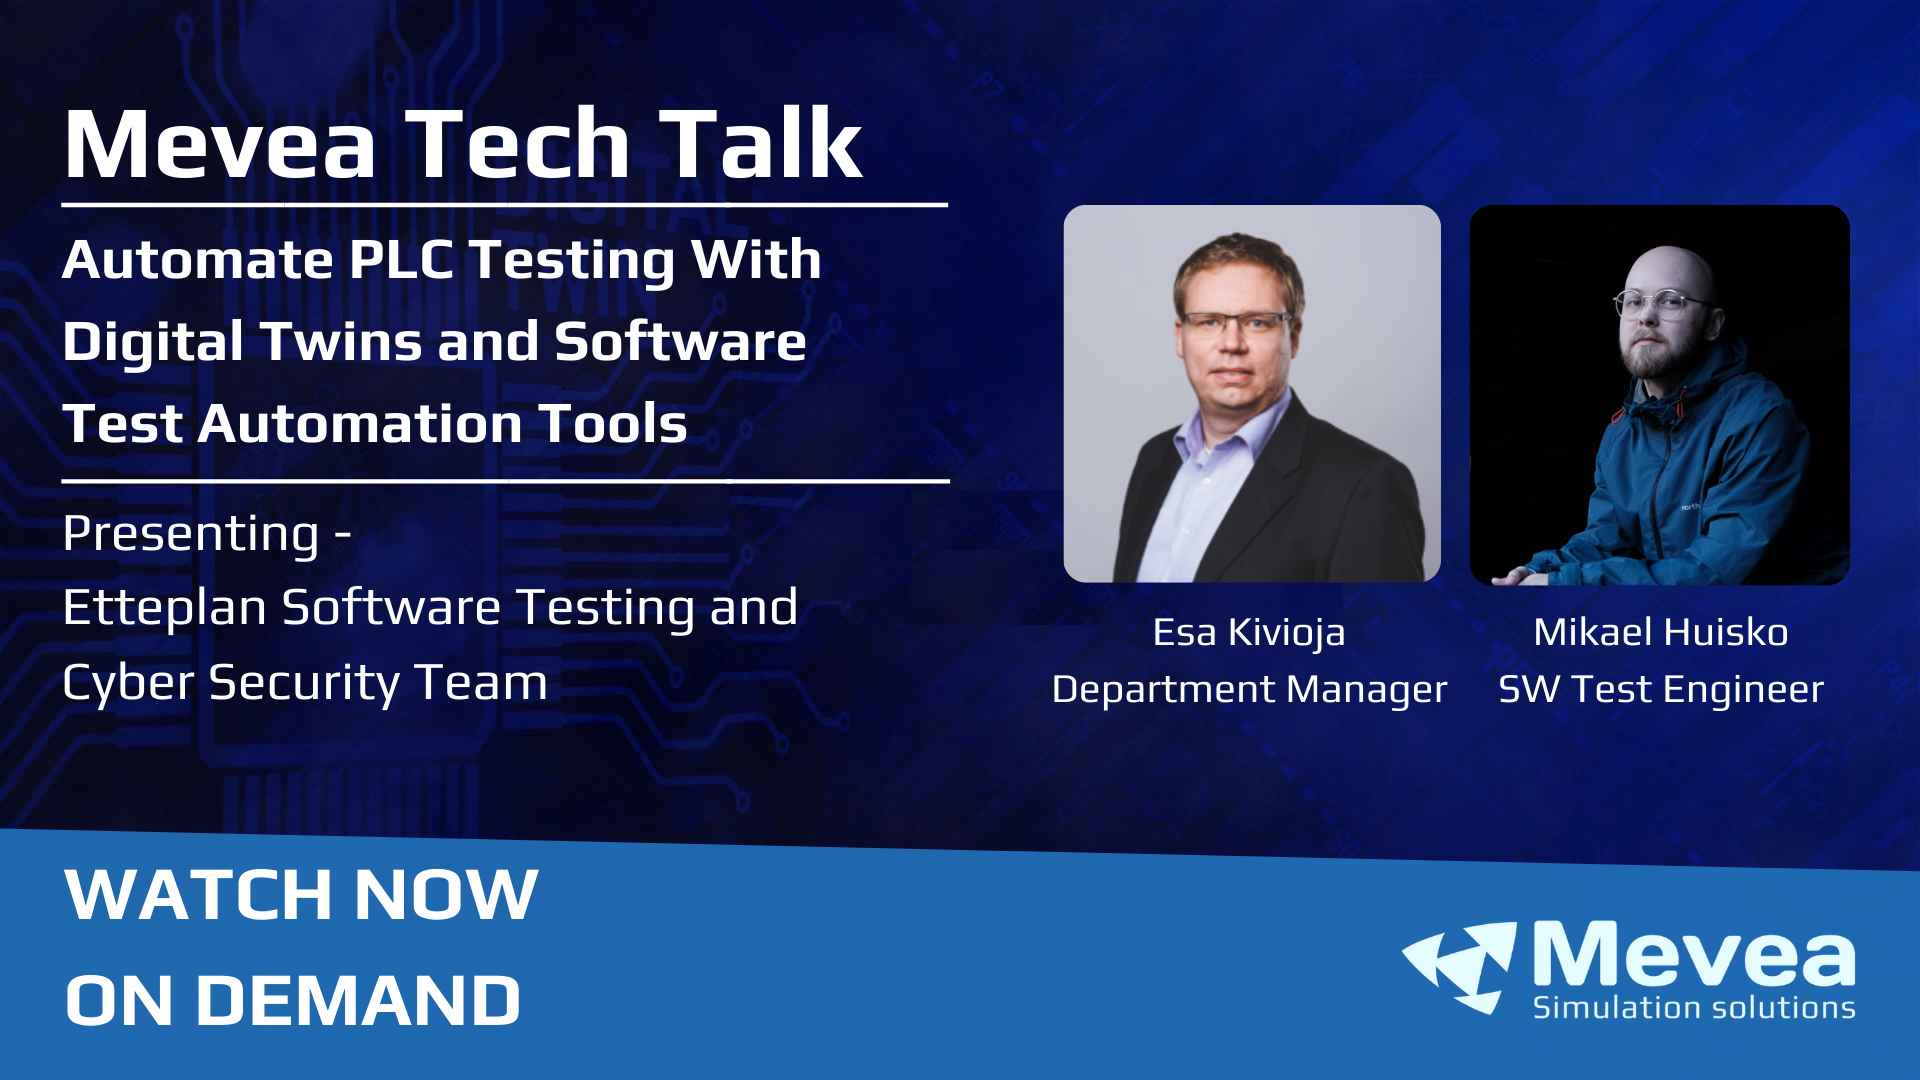 Mevea Tech Talk – Automate PLC Testing With Digital Twins and Software Test Automation Tools